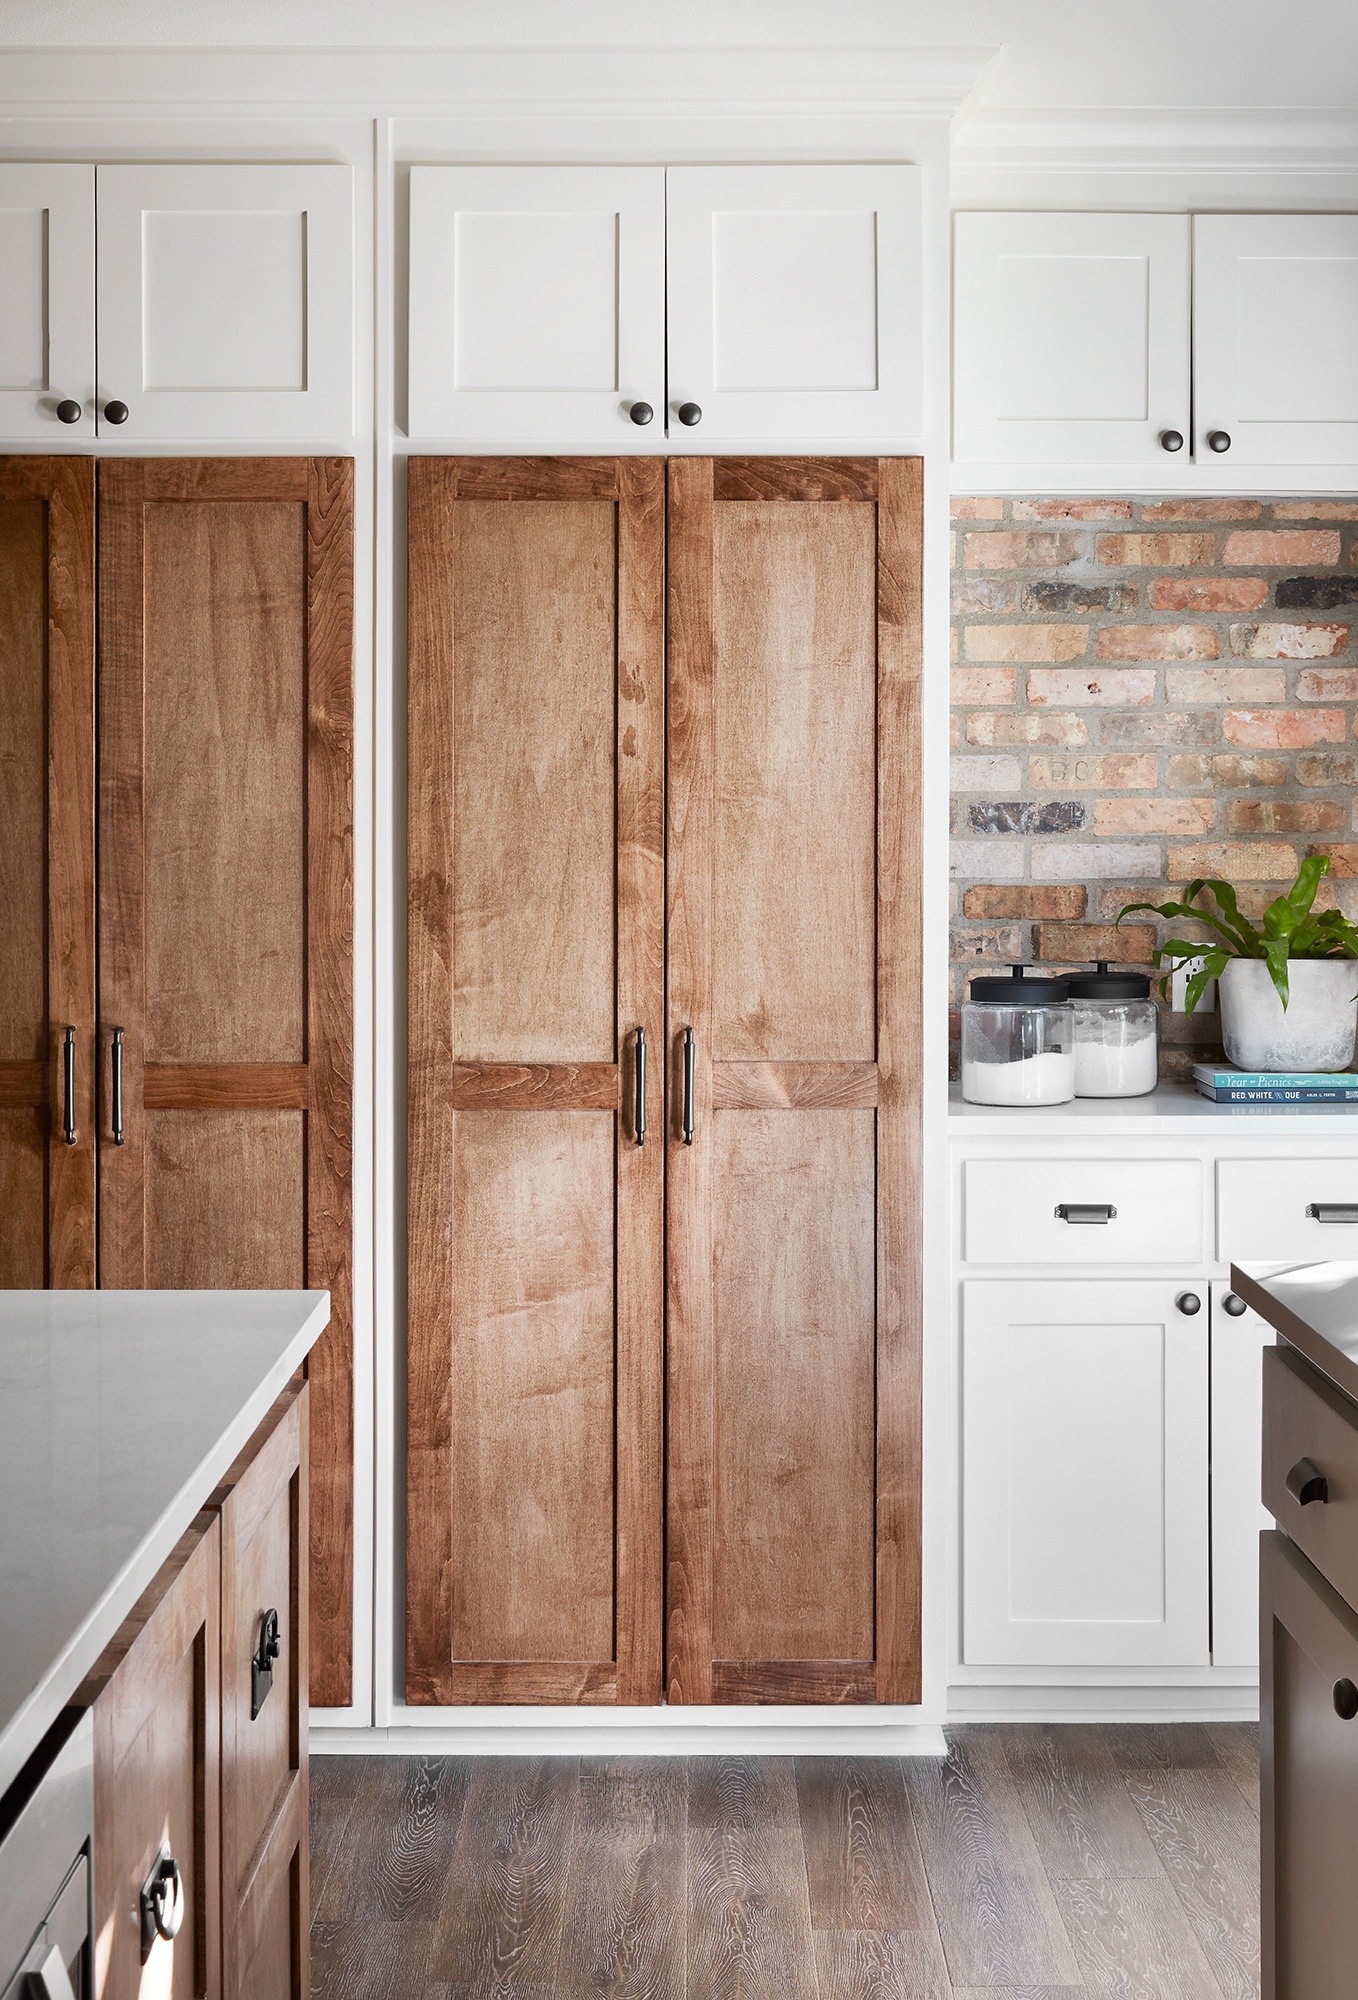 keeping cabinet doors unfinished gives the look of old world charm